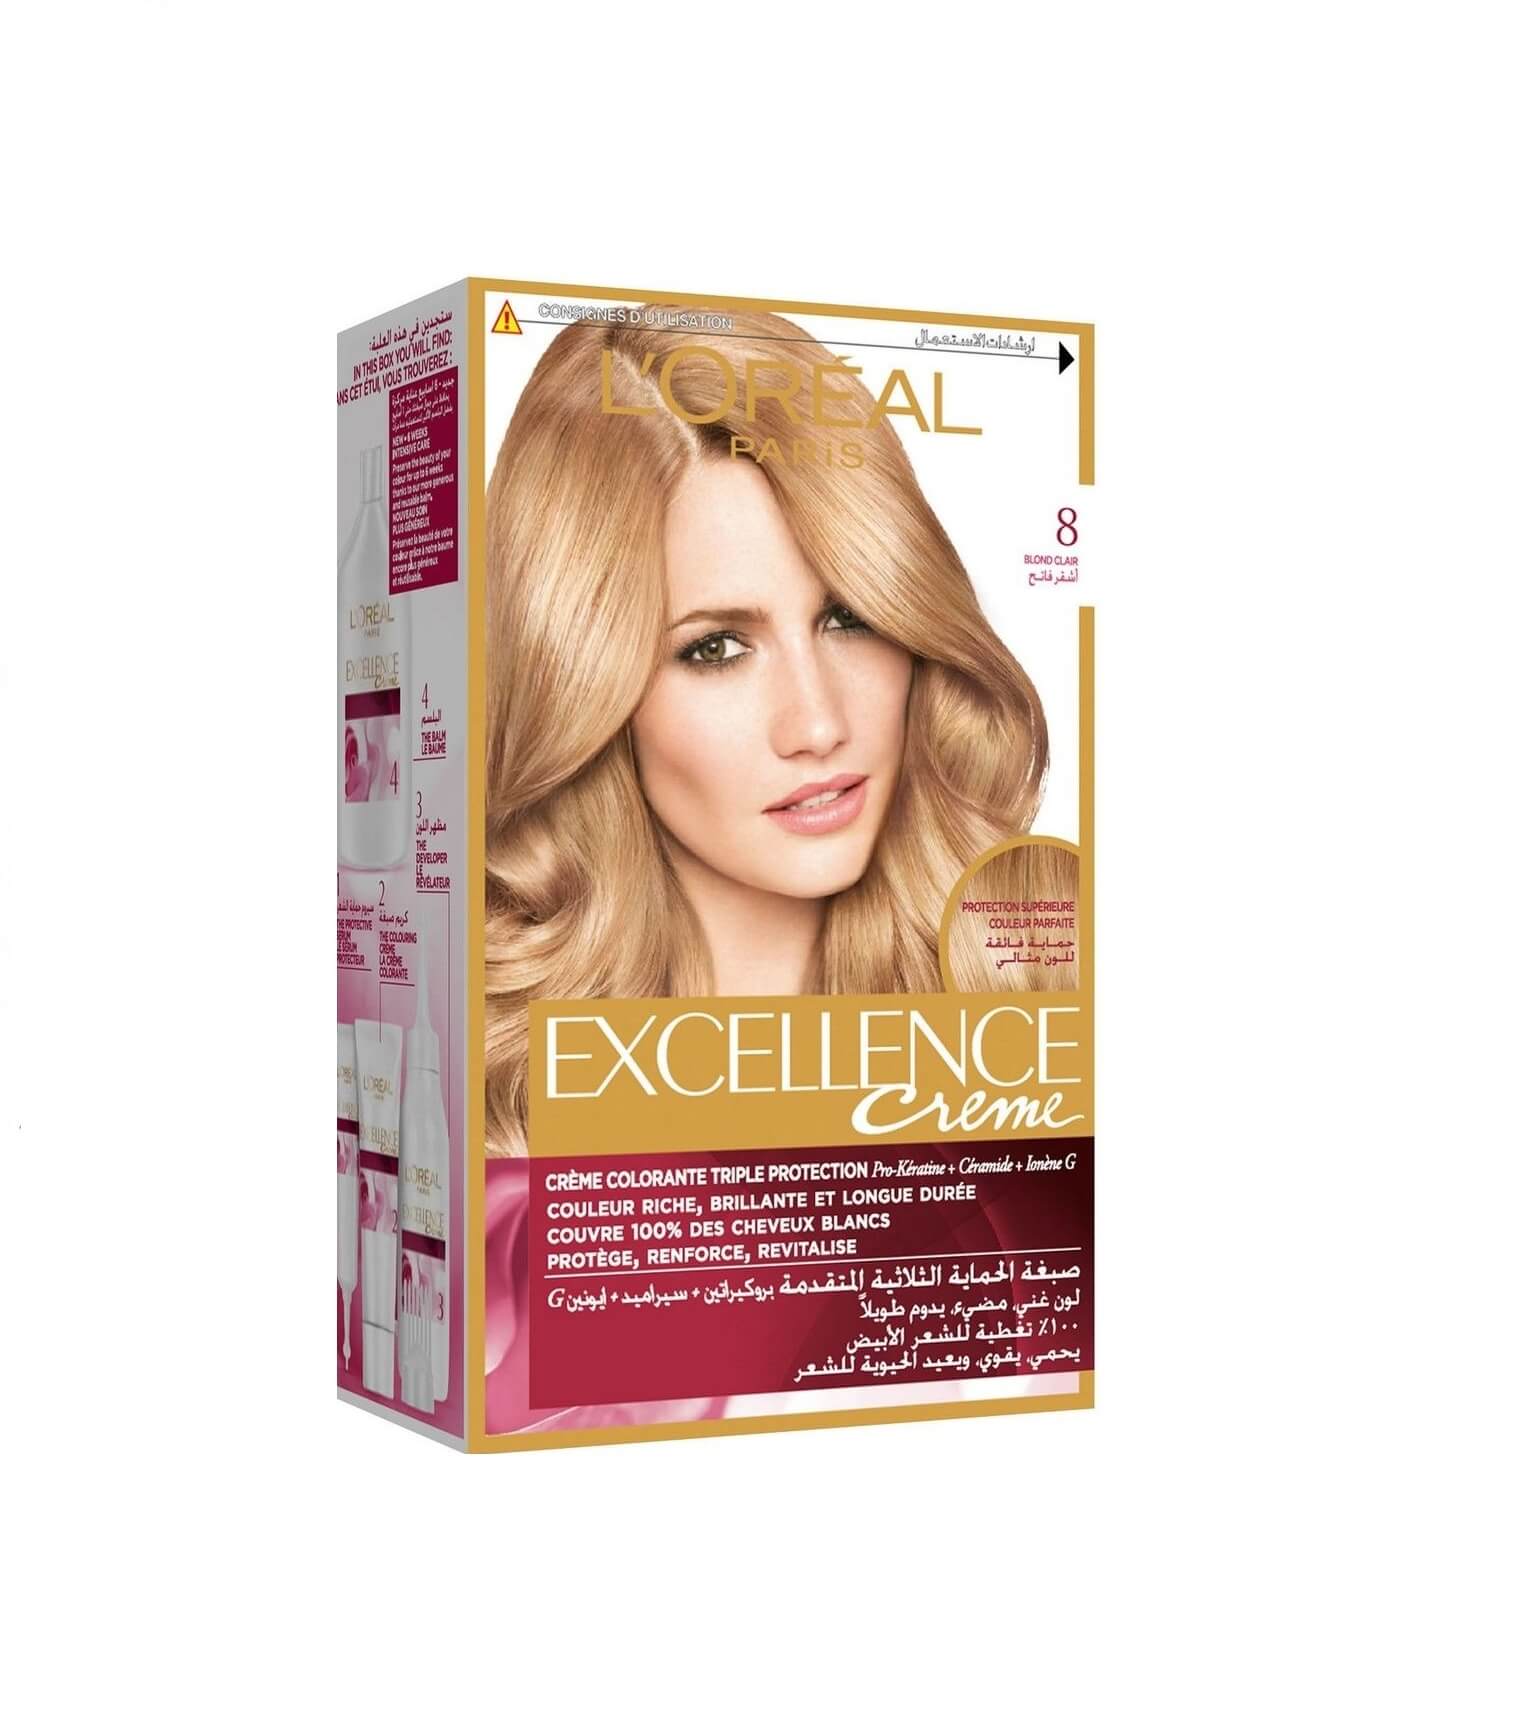 LOreal Excellence Creme - 8 Light Blonde